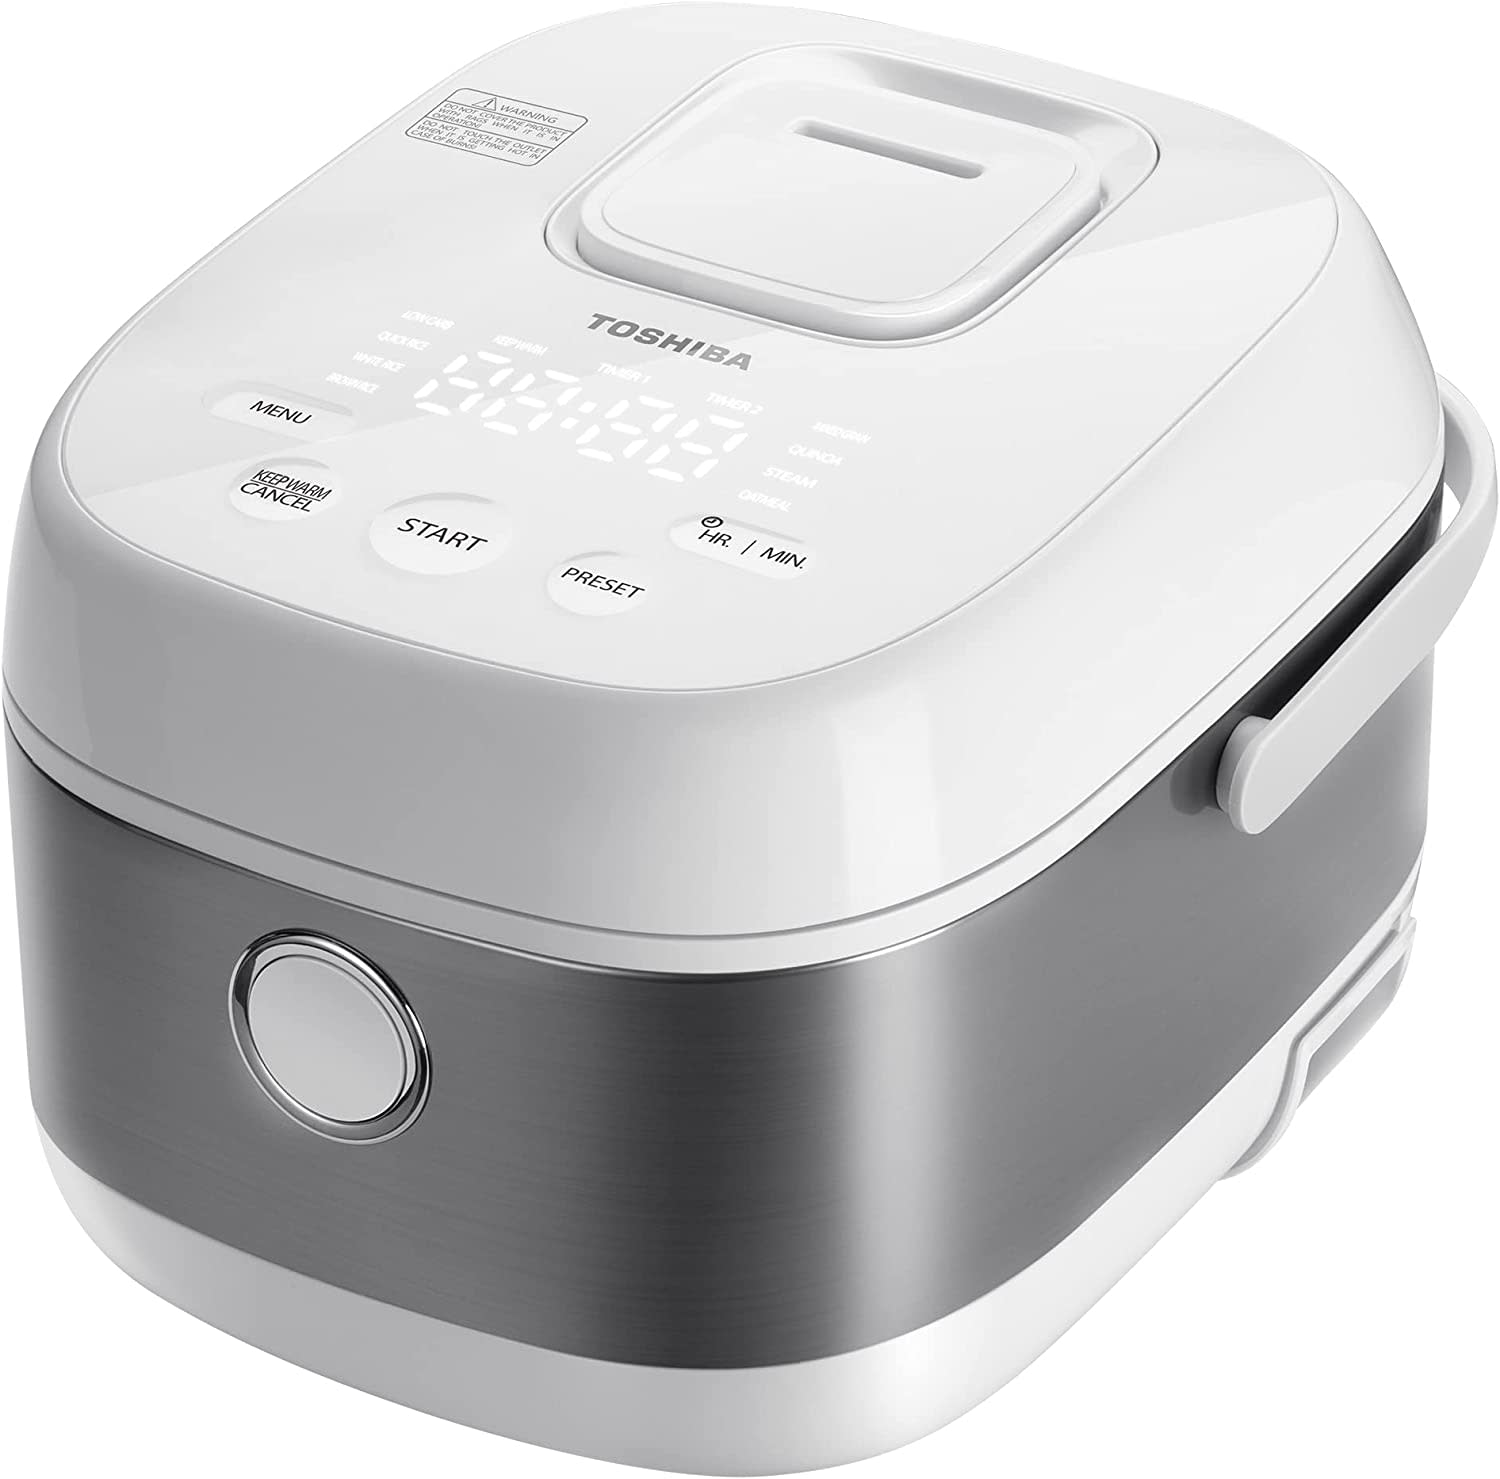 Toshiba Low Carb Digital Programmable Multi-functional Rice Cooker